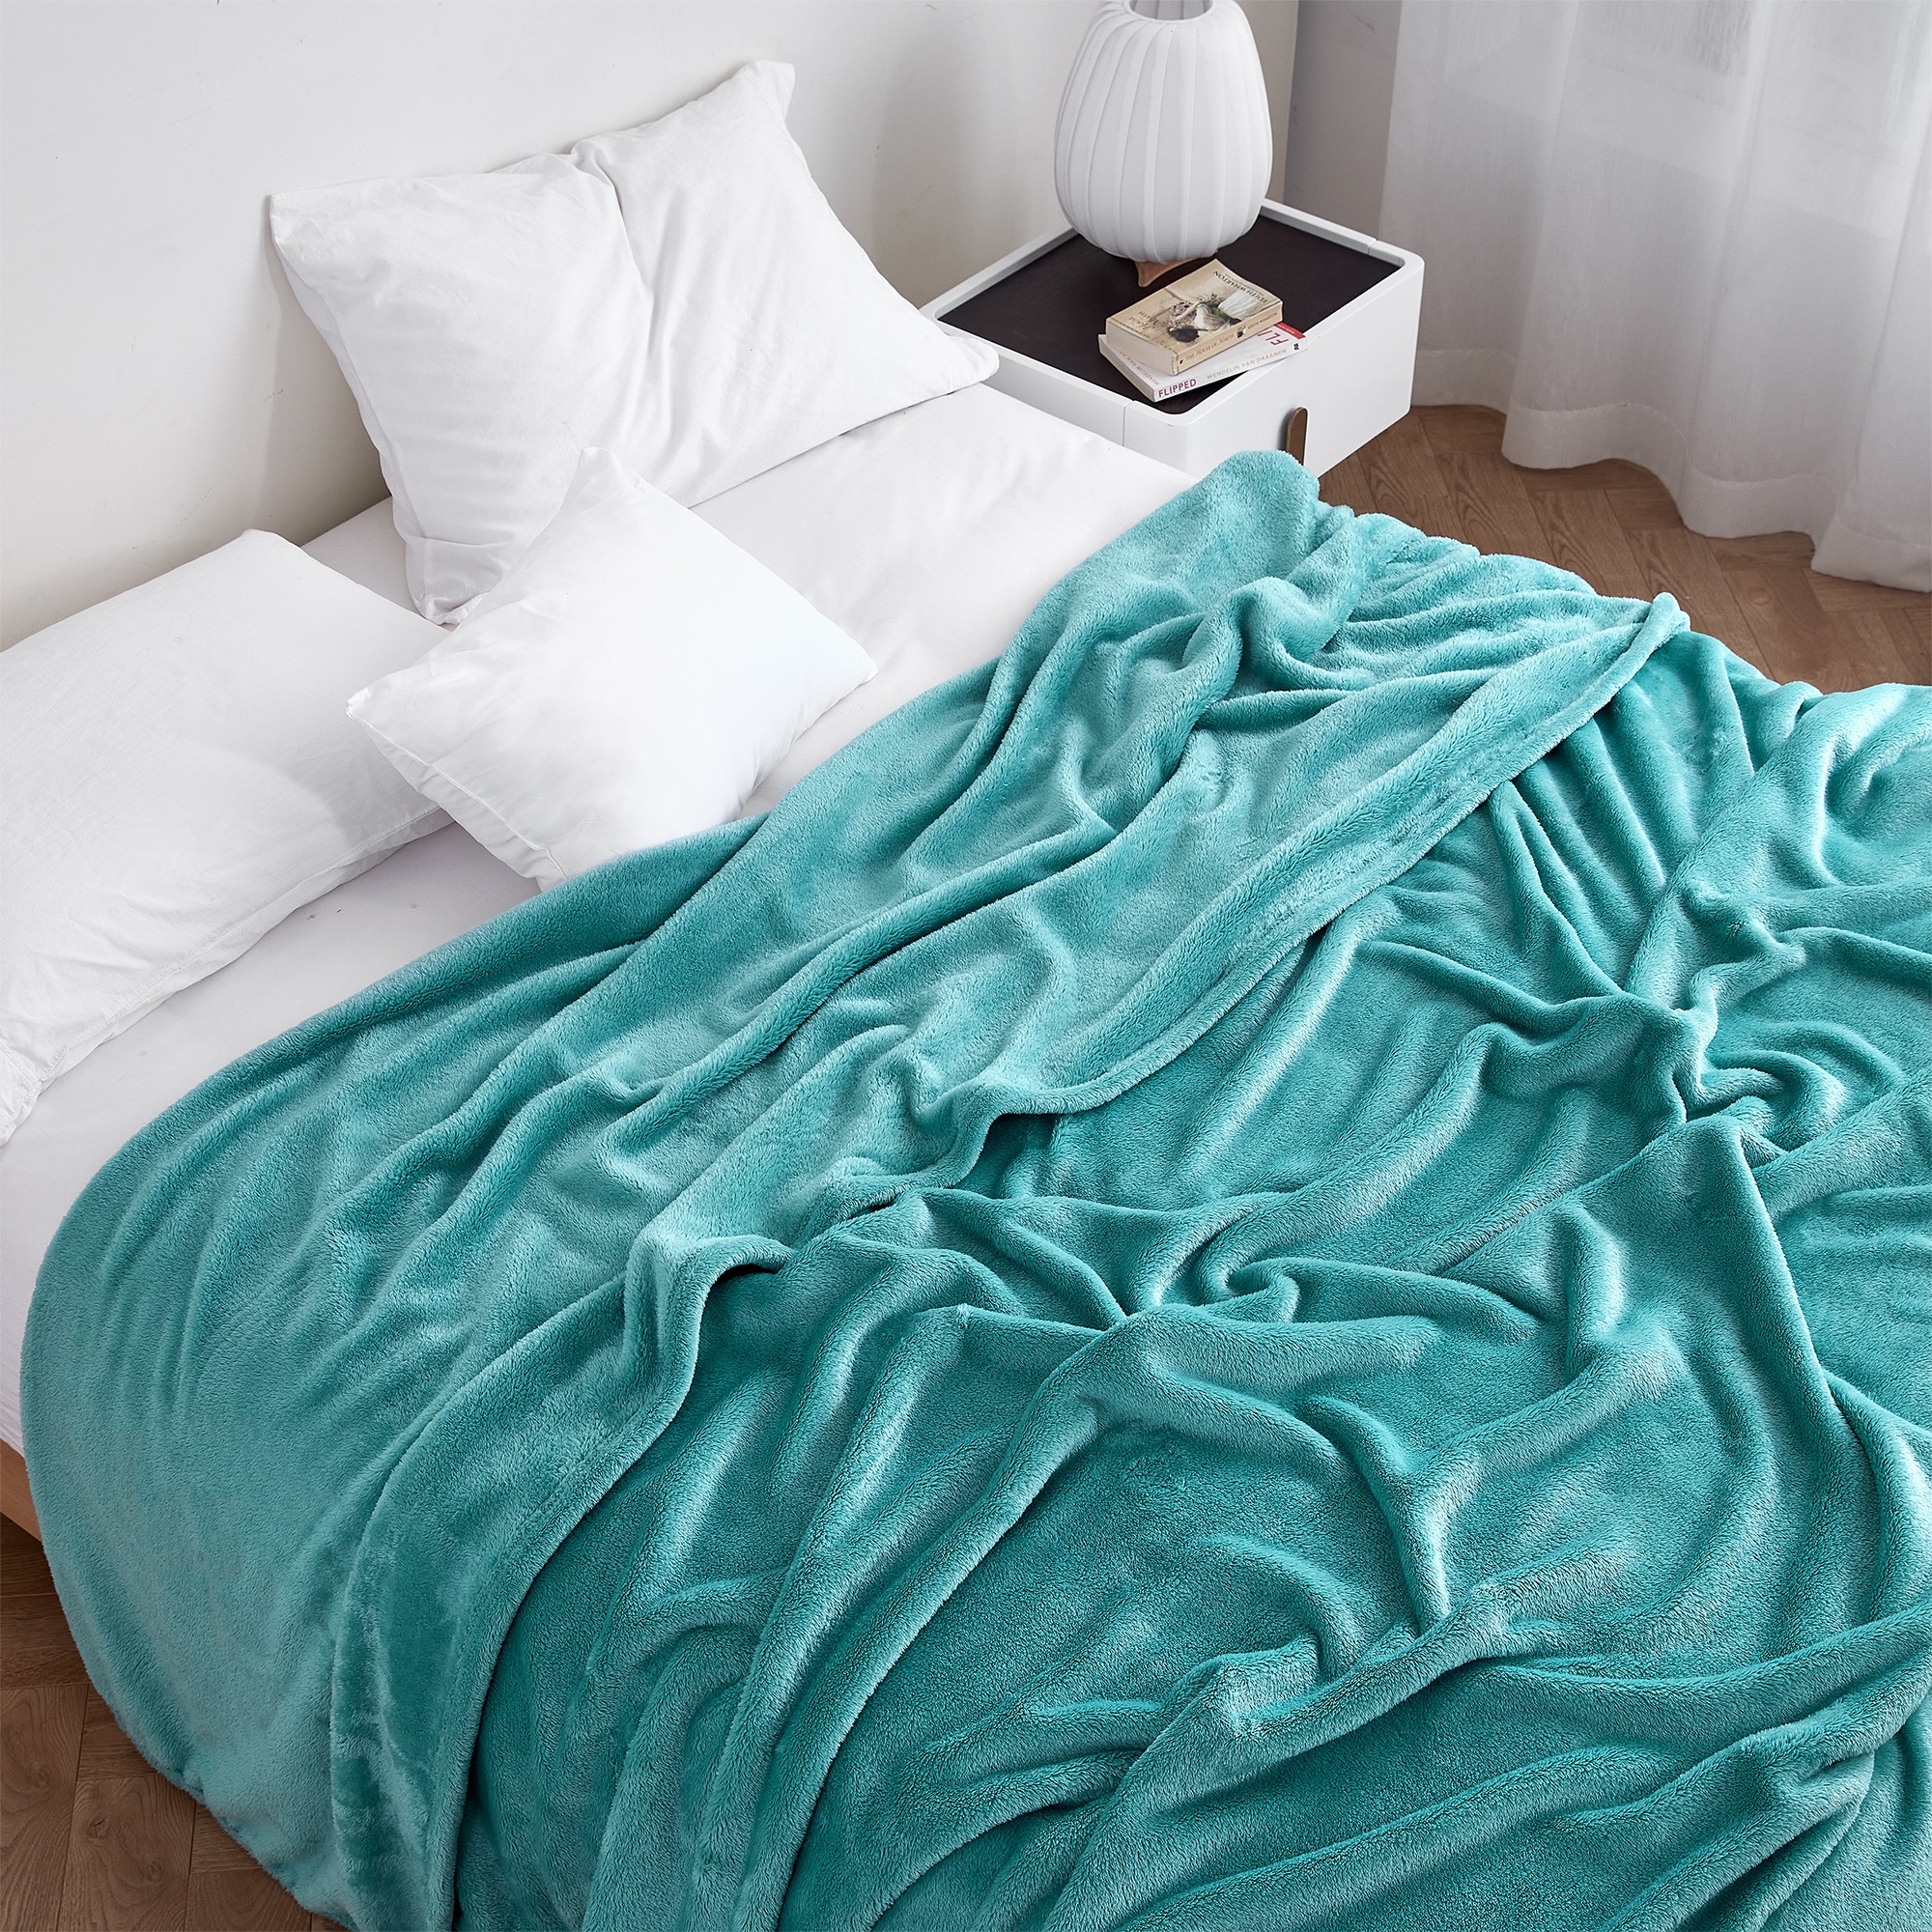 Me Sooo Comfy - Coma Inducer Blanket - Dusty Turquoise